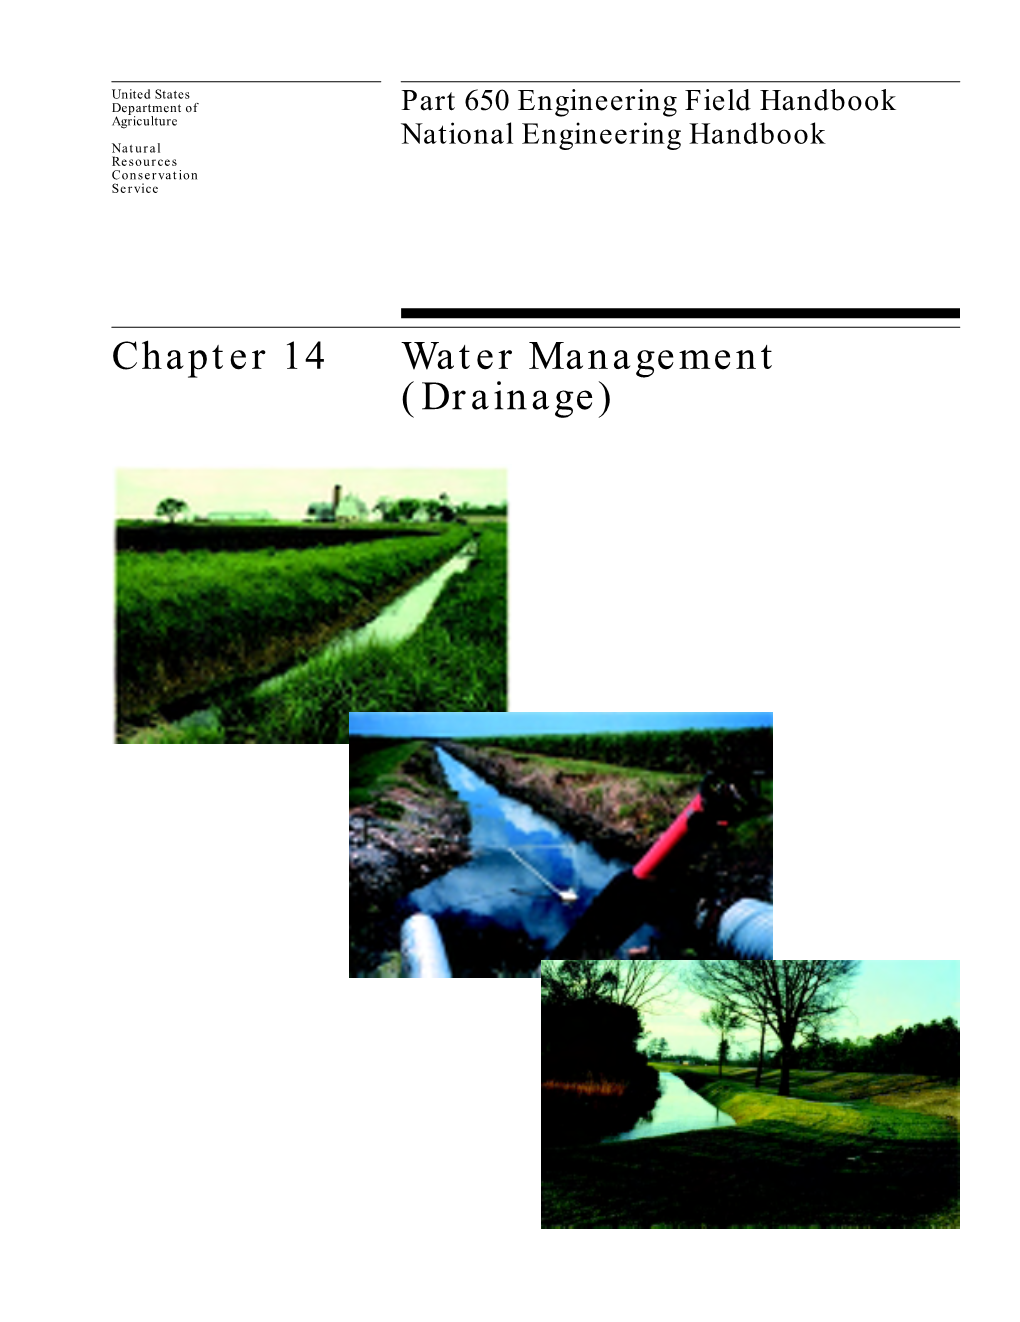 Chapter 14 Water Management (Drainage) Chapter 14 Water Management (Drainage) Part 650 Engineering Field Handbook